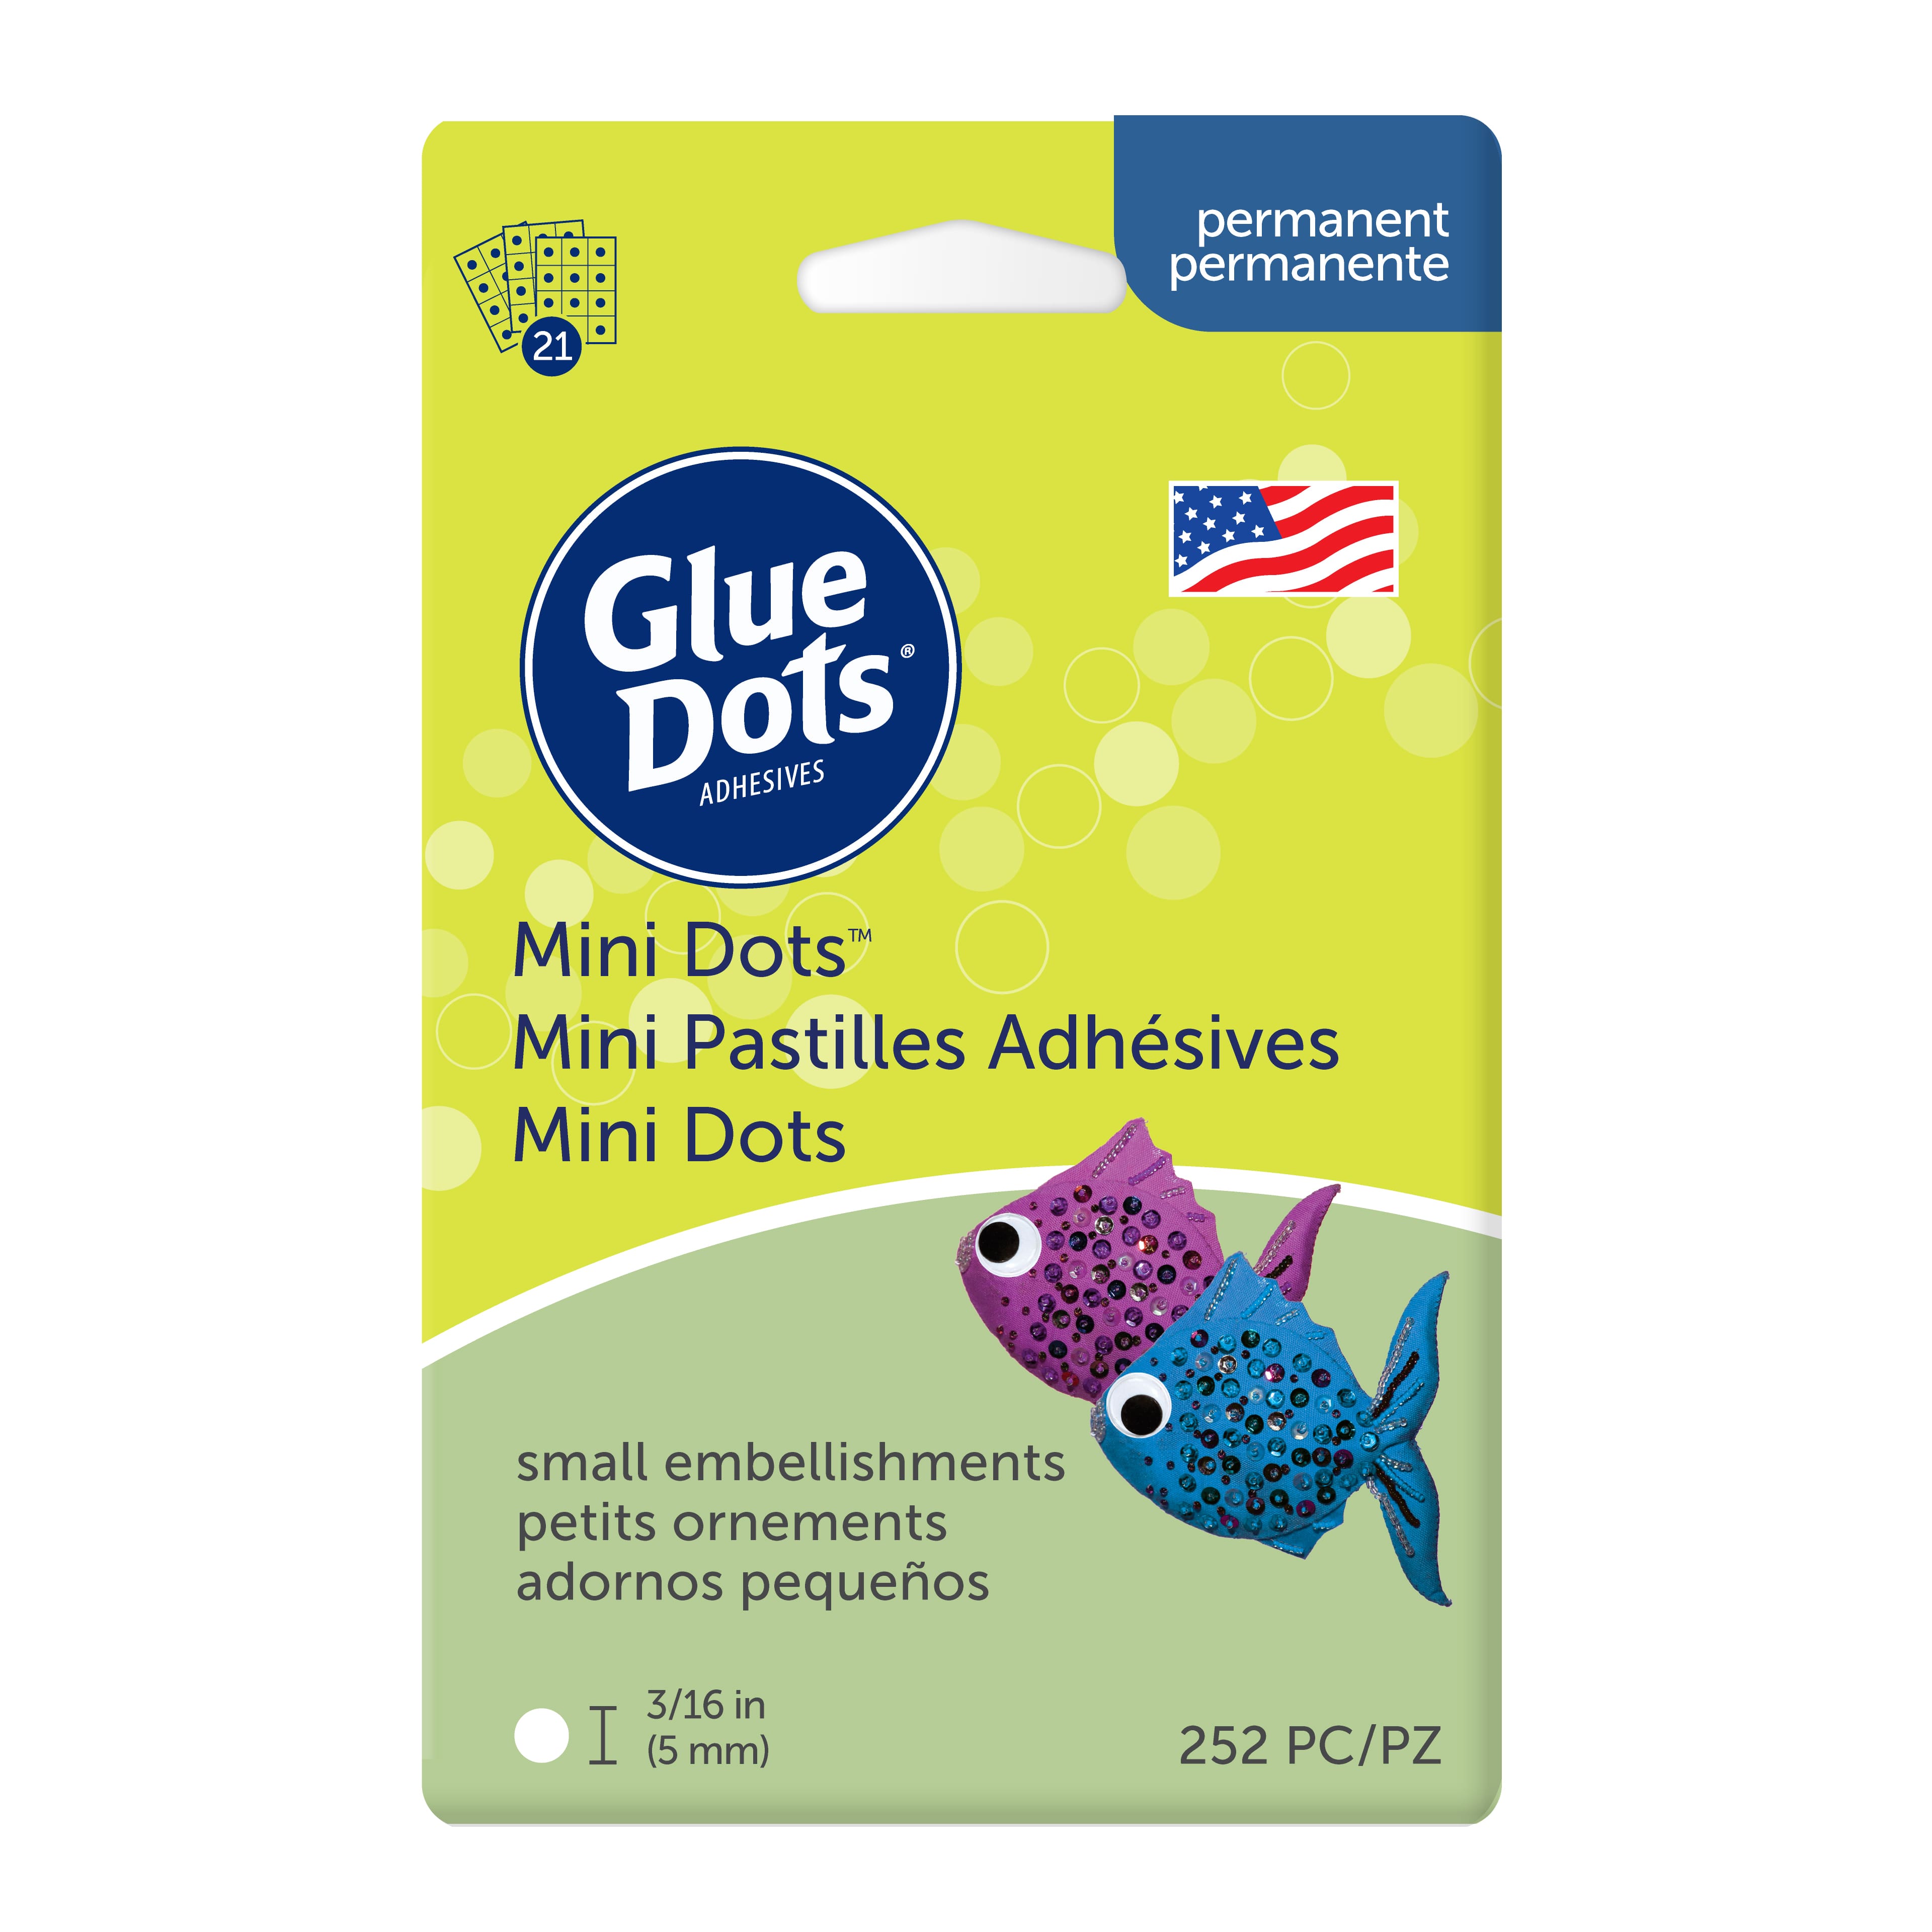 Glue Dots .5 Removable Dot Sheets Value Pack 600 Clear Dots